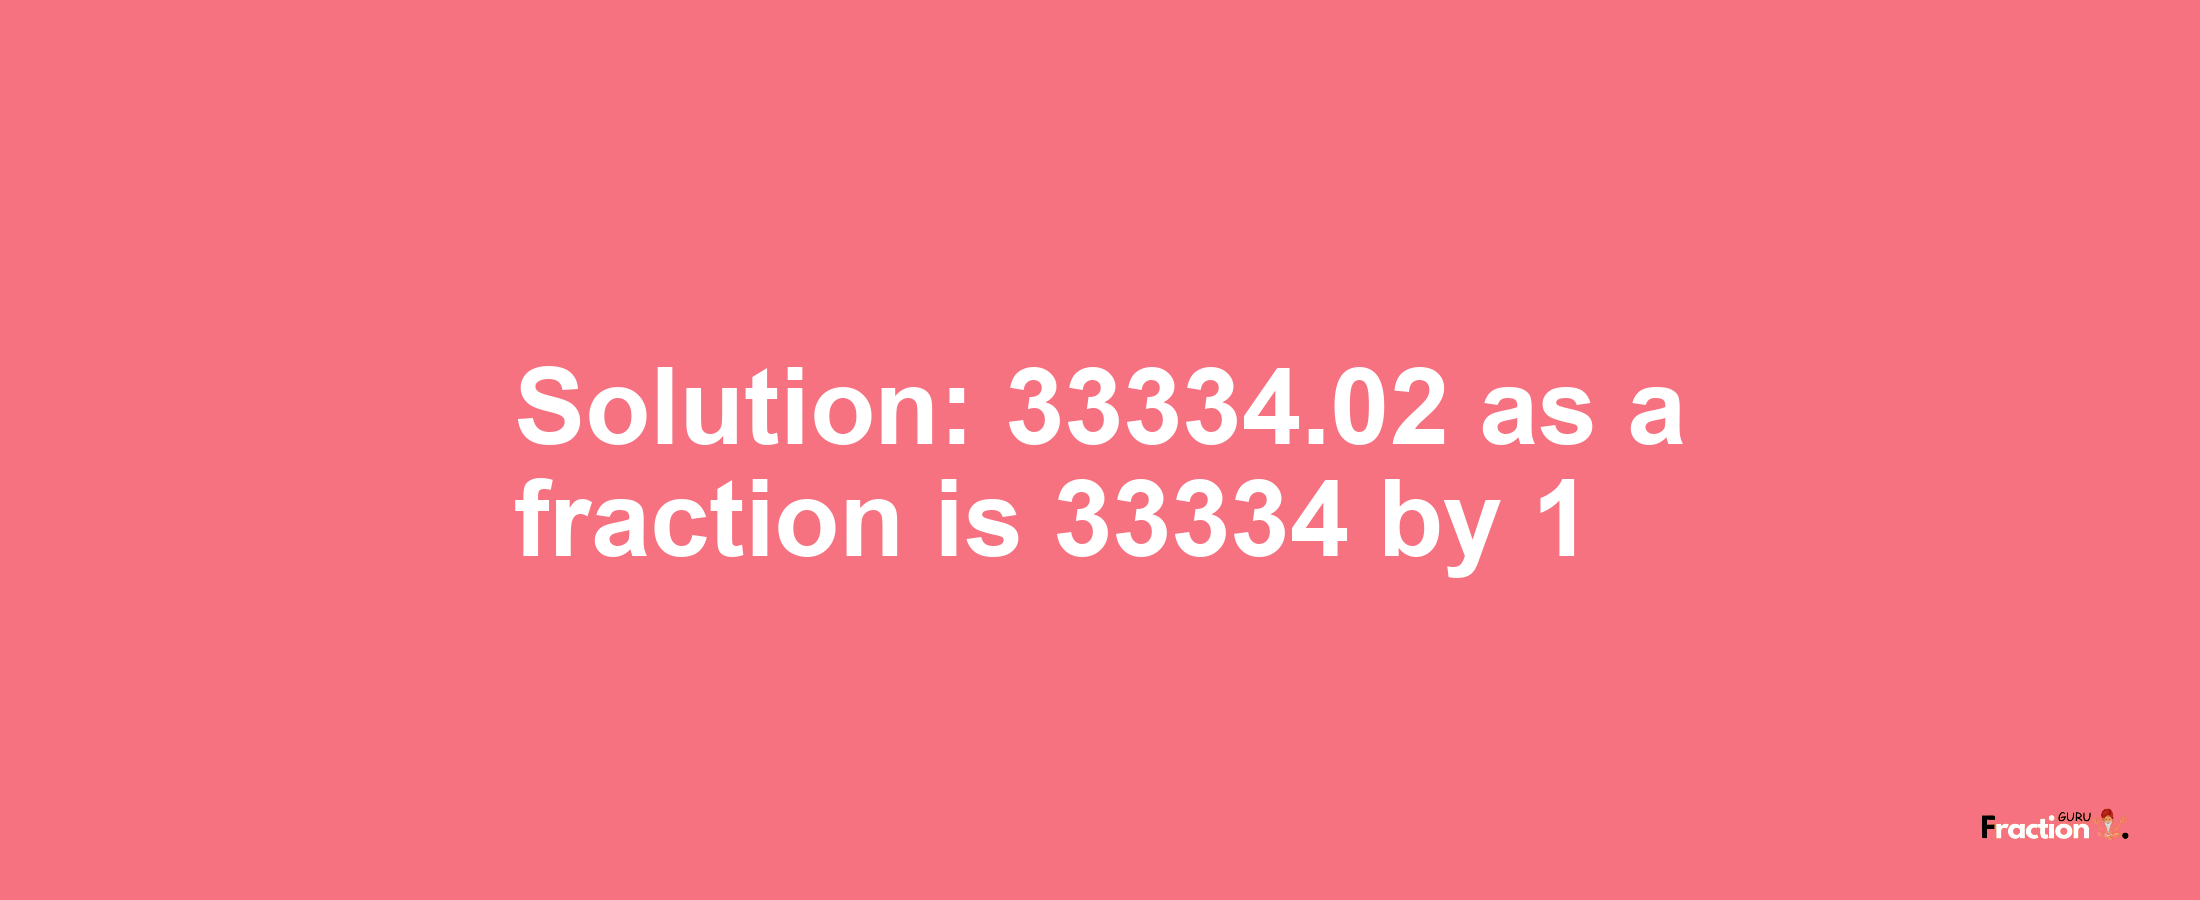 Solution:33334.02 as a fraction is 33334/1